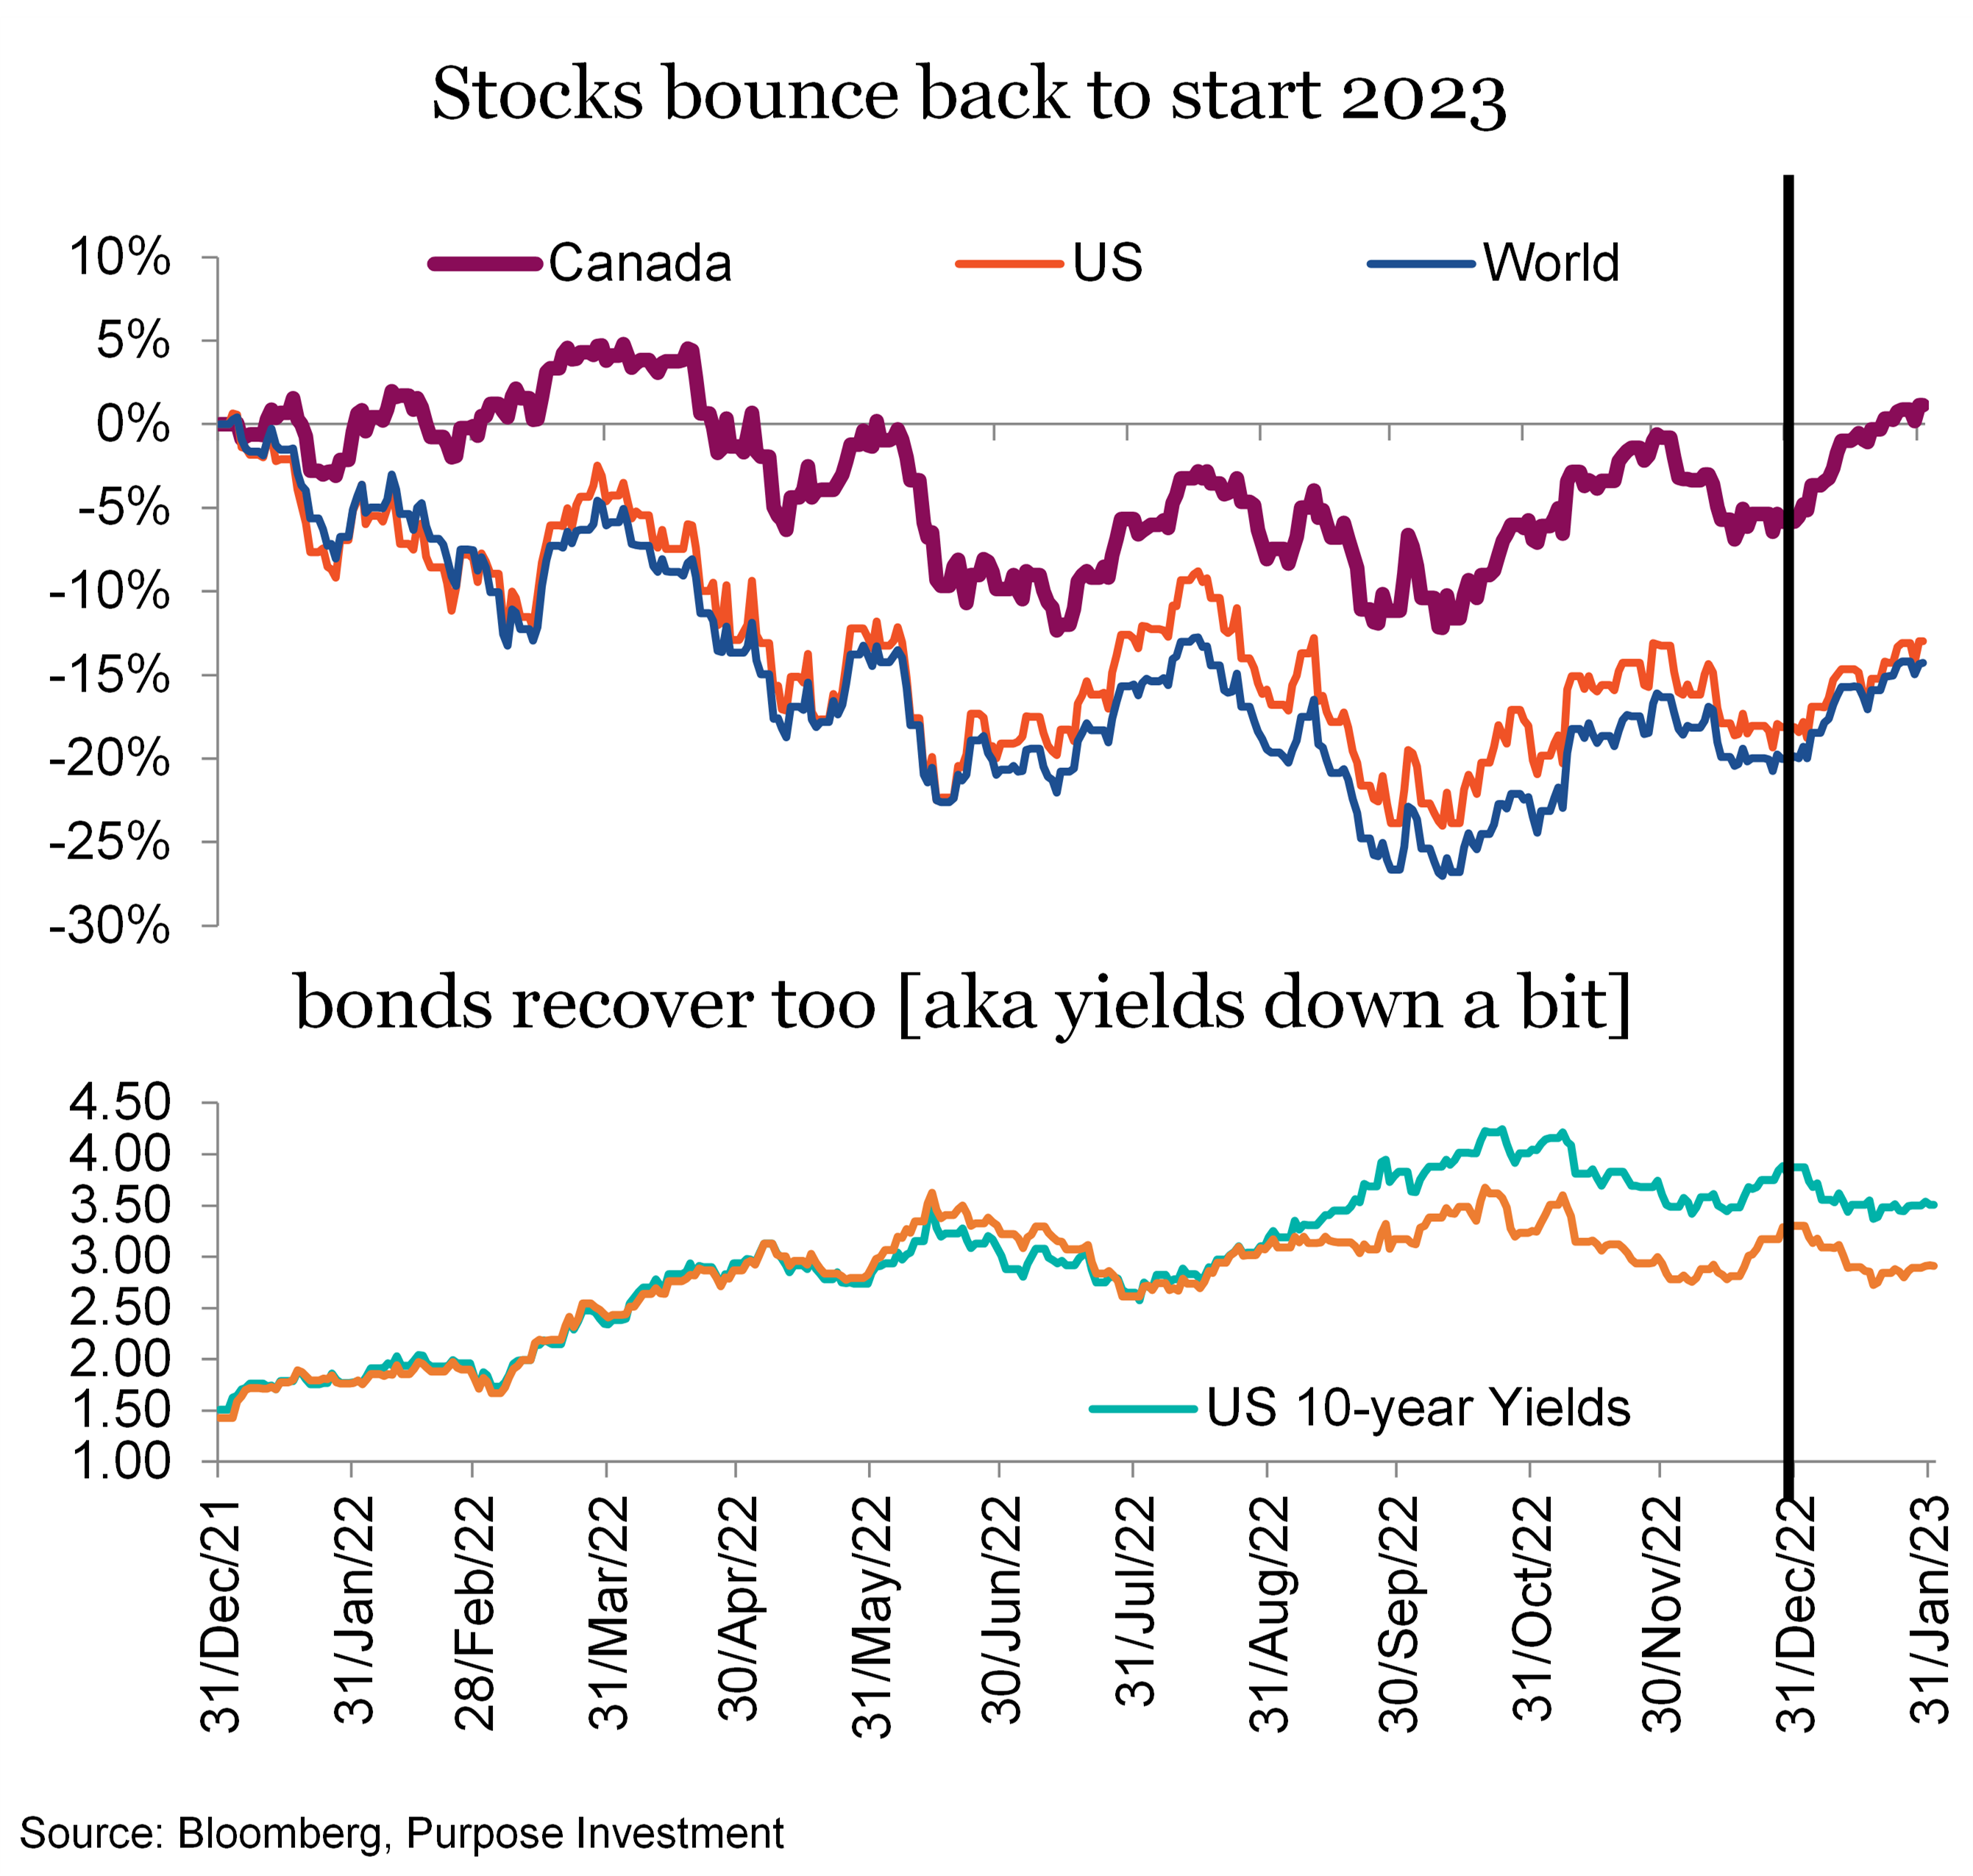 Stocks bounce back to start 2023
bonds recover too [aka yields down a bit]